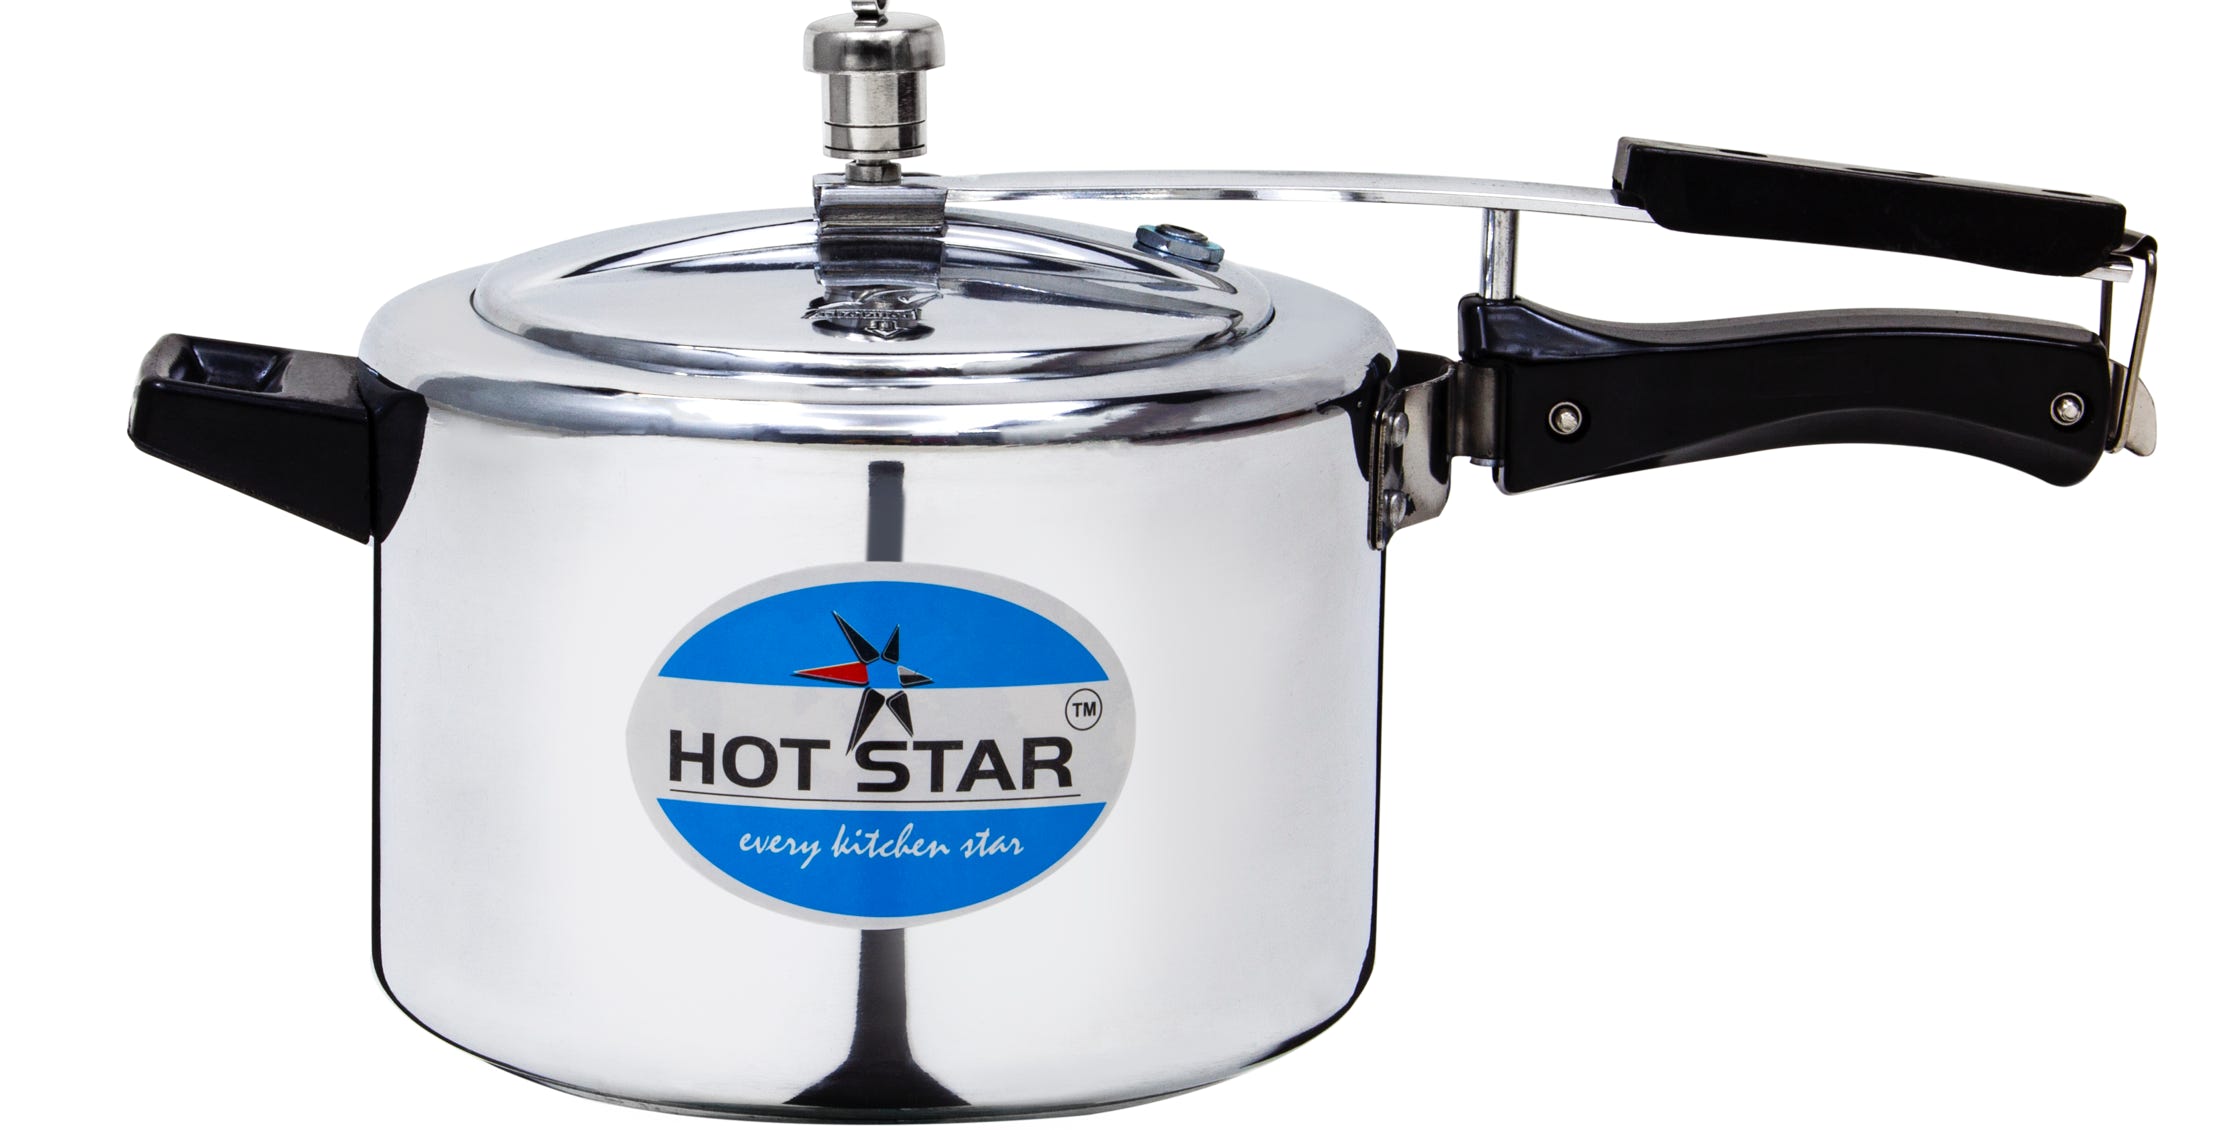 Pressure cooker photography for Hot Star Background to sell on Amazon.com